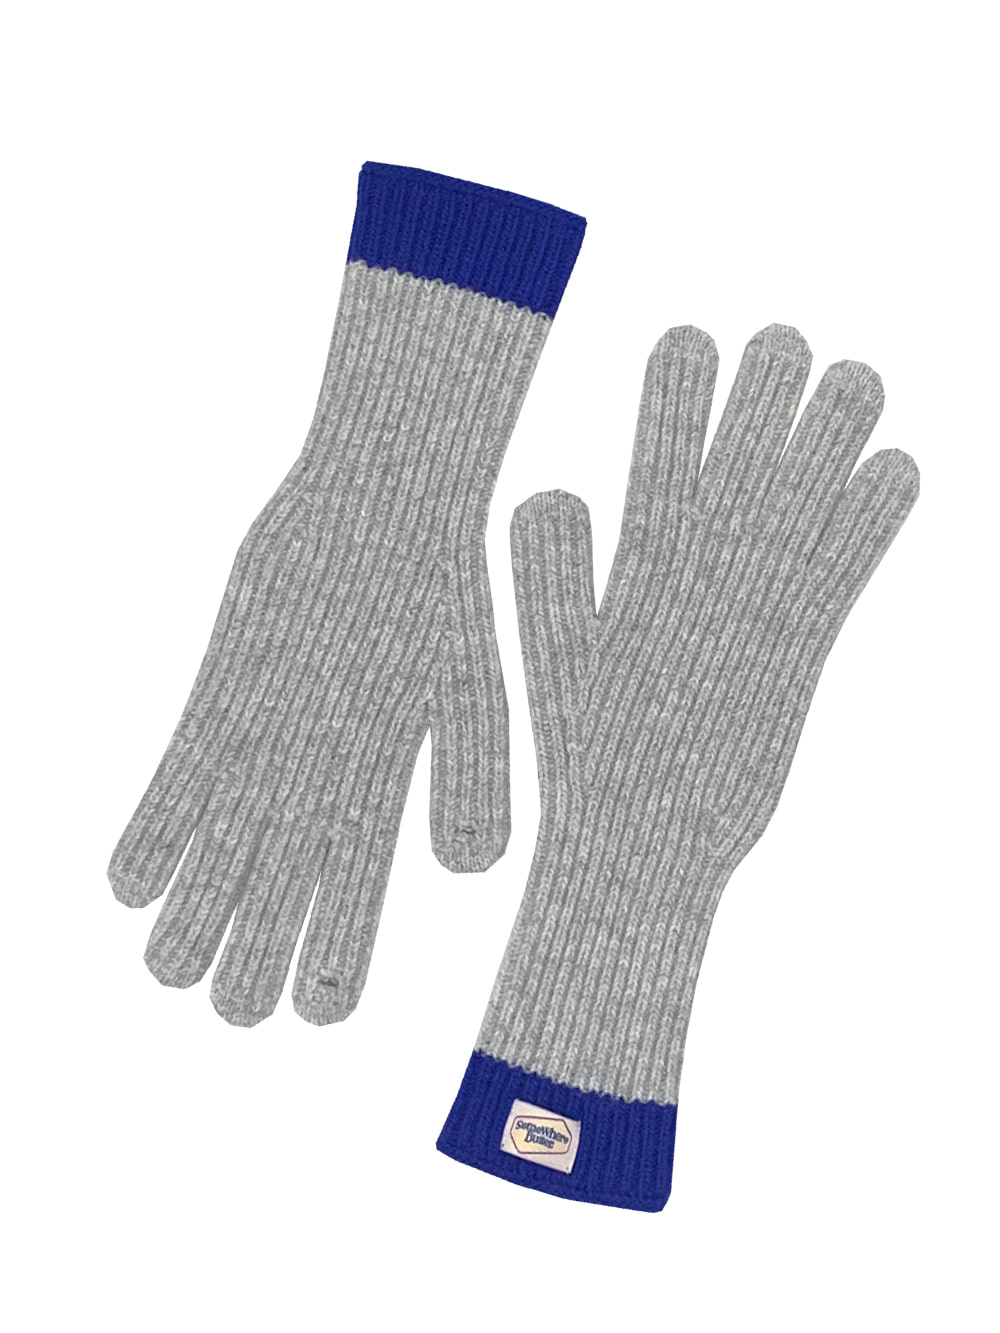 [preview] butter wool gloves - grey